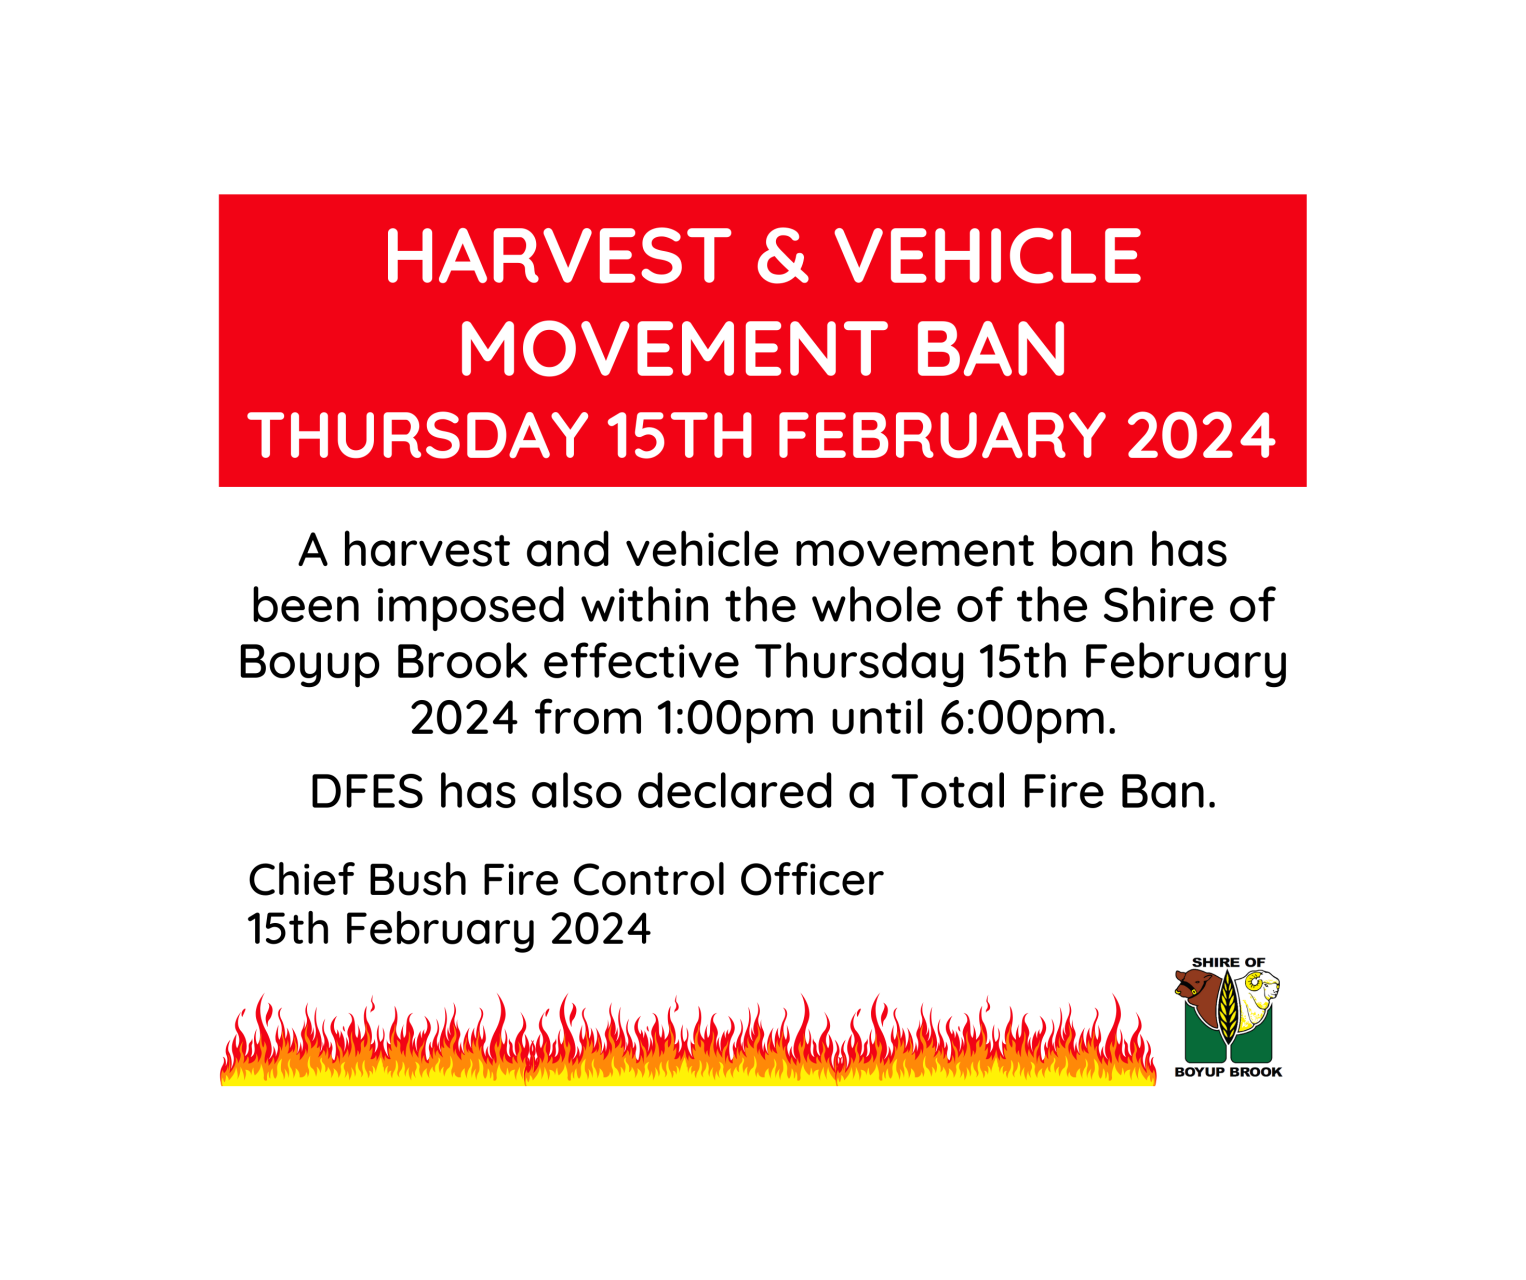 Harvest and Vehicle Movement Ban Thursday 15th February 2024